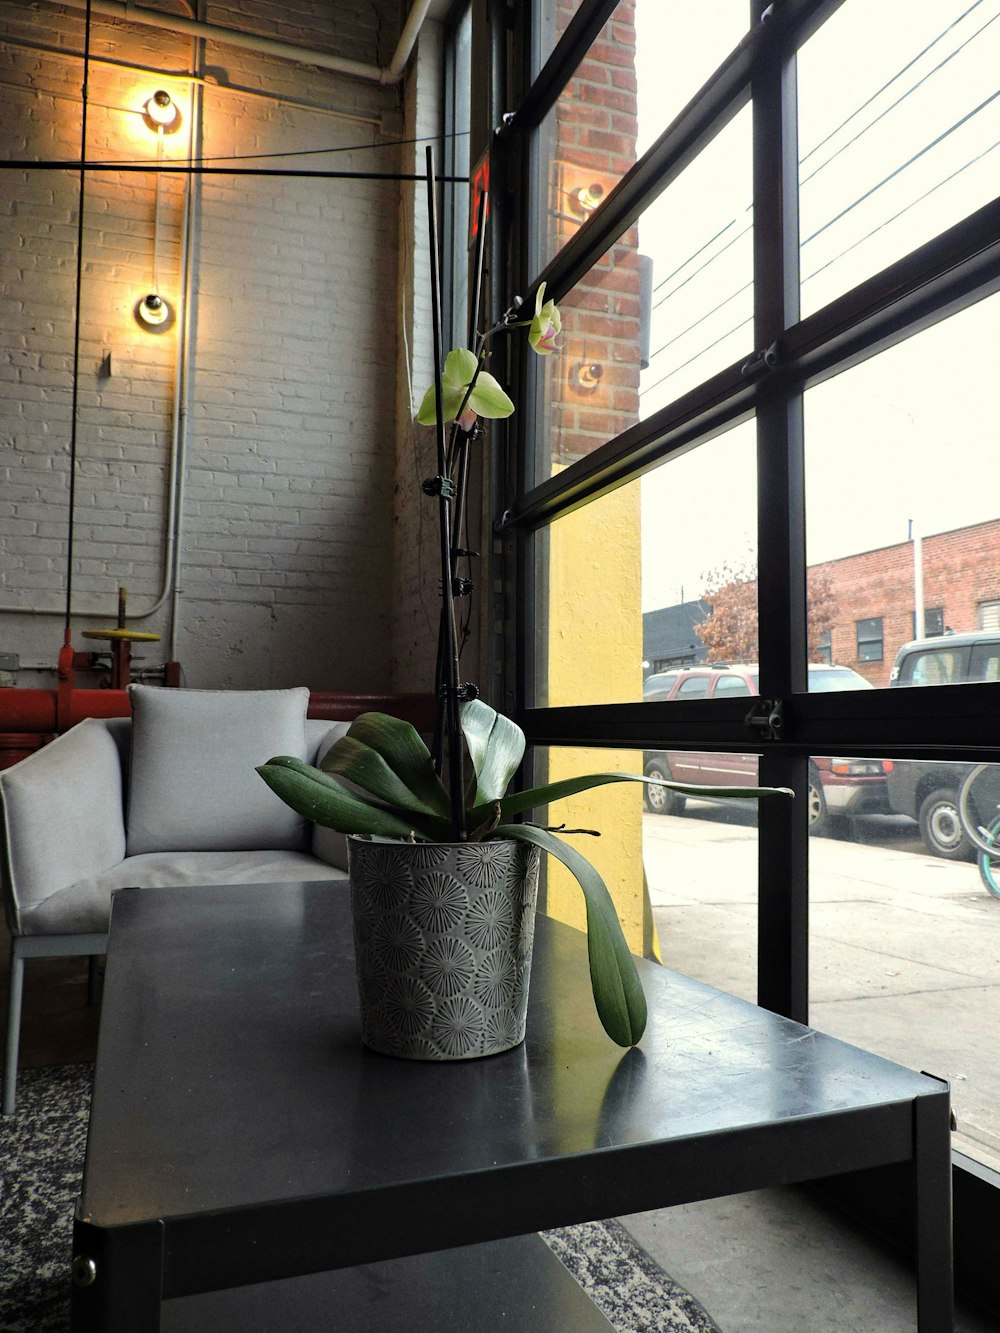 a potted plant sitting on a table in front of a window